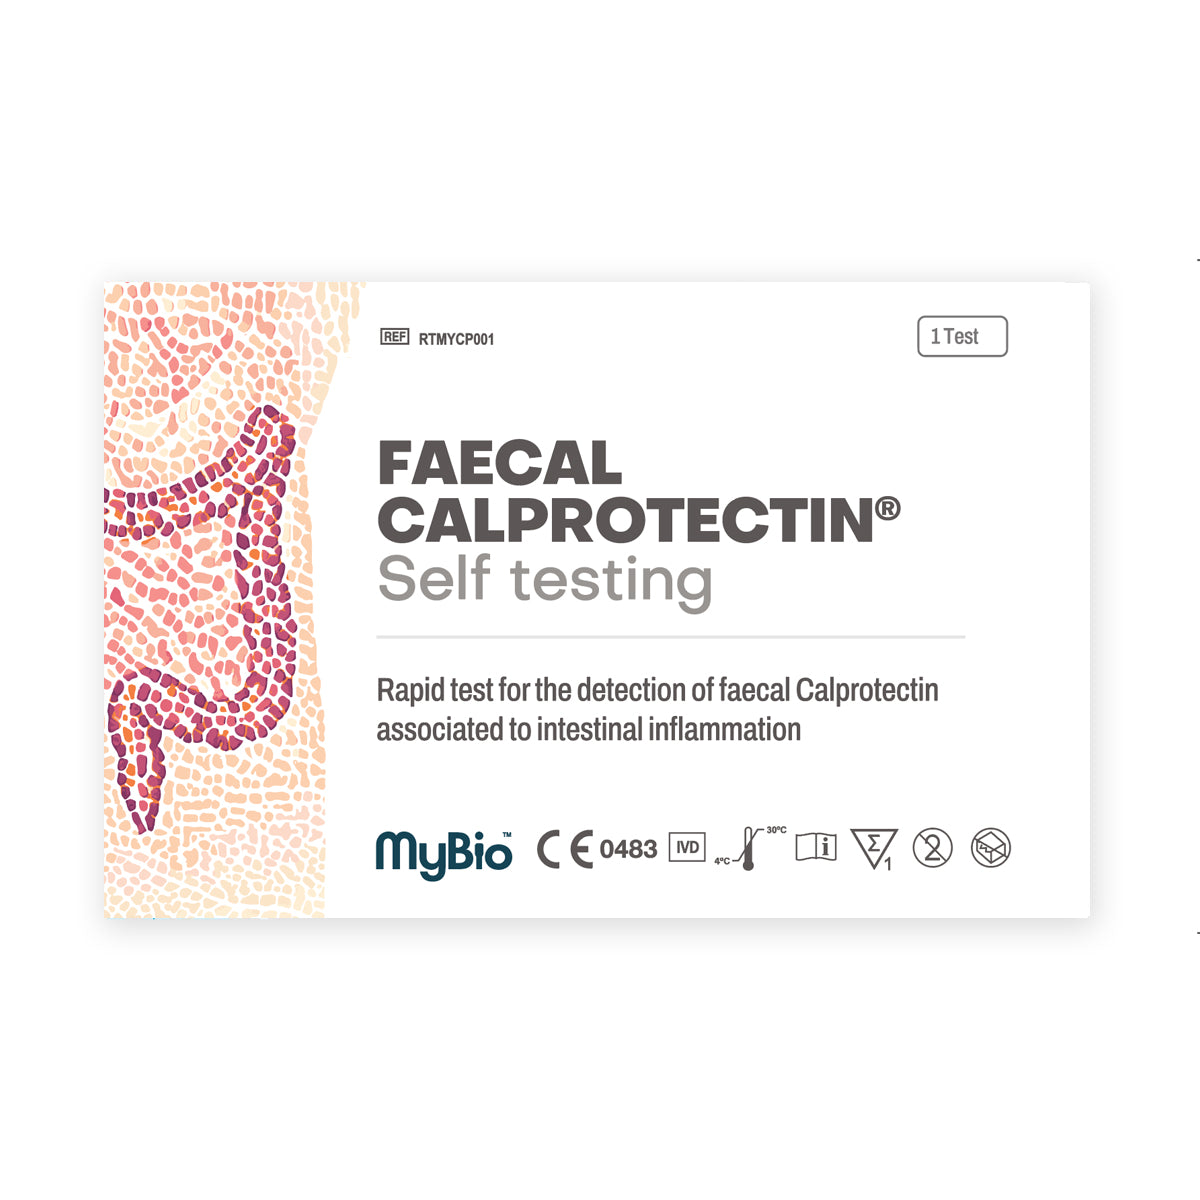 MyBio Calprotectin Check At Home Self Test detects inflammatory bowel diseases such as Crohn’s disease or ulcerative colitis